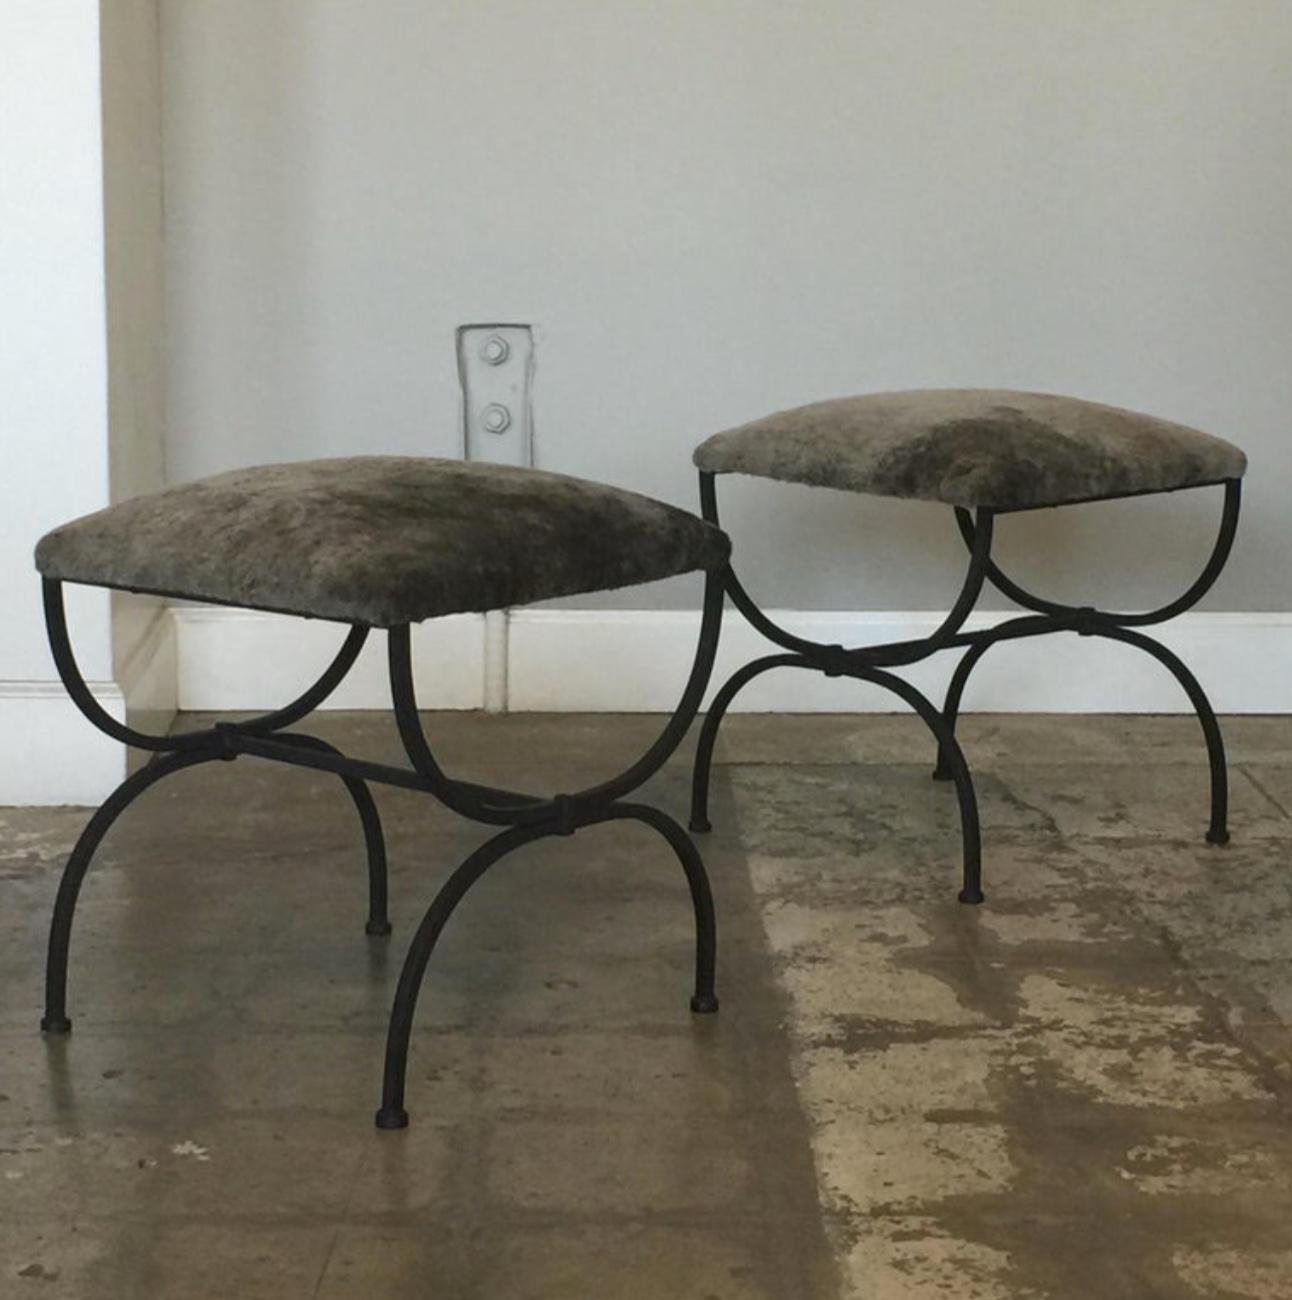 Pair of chic gray shearling 'Strapontin' stools by Design Frères. Matte black steel base with grey shearling upholstered seats.